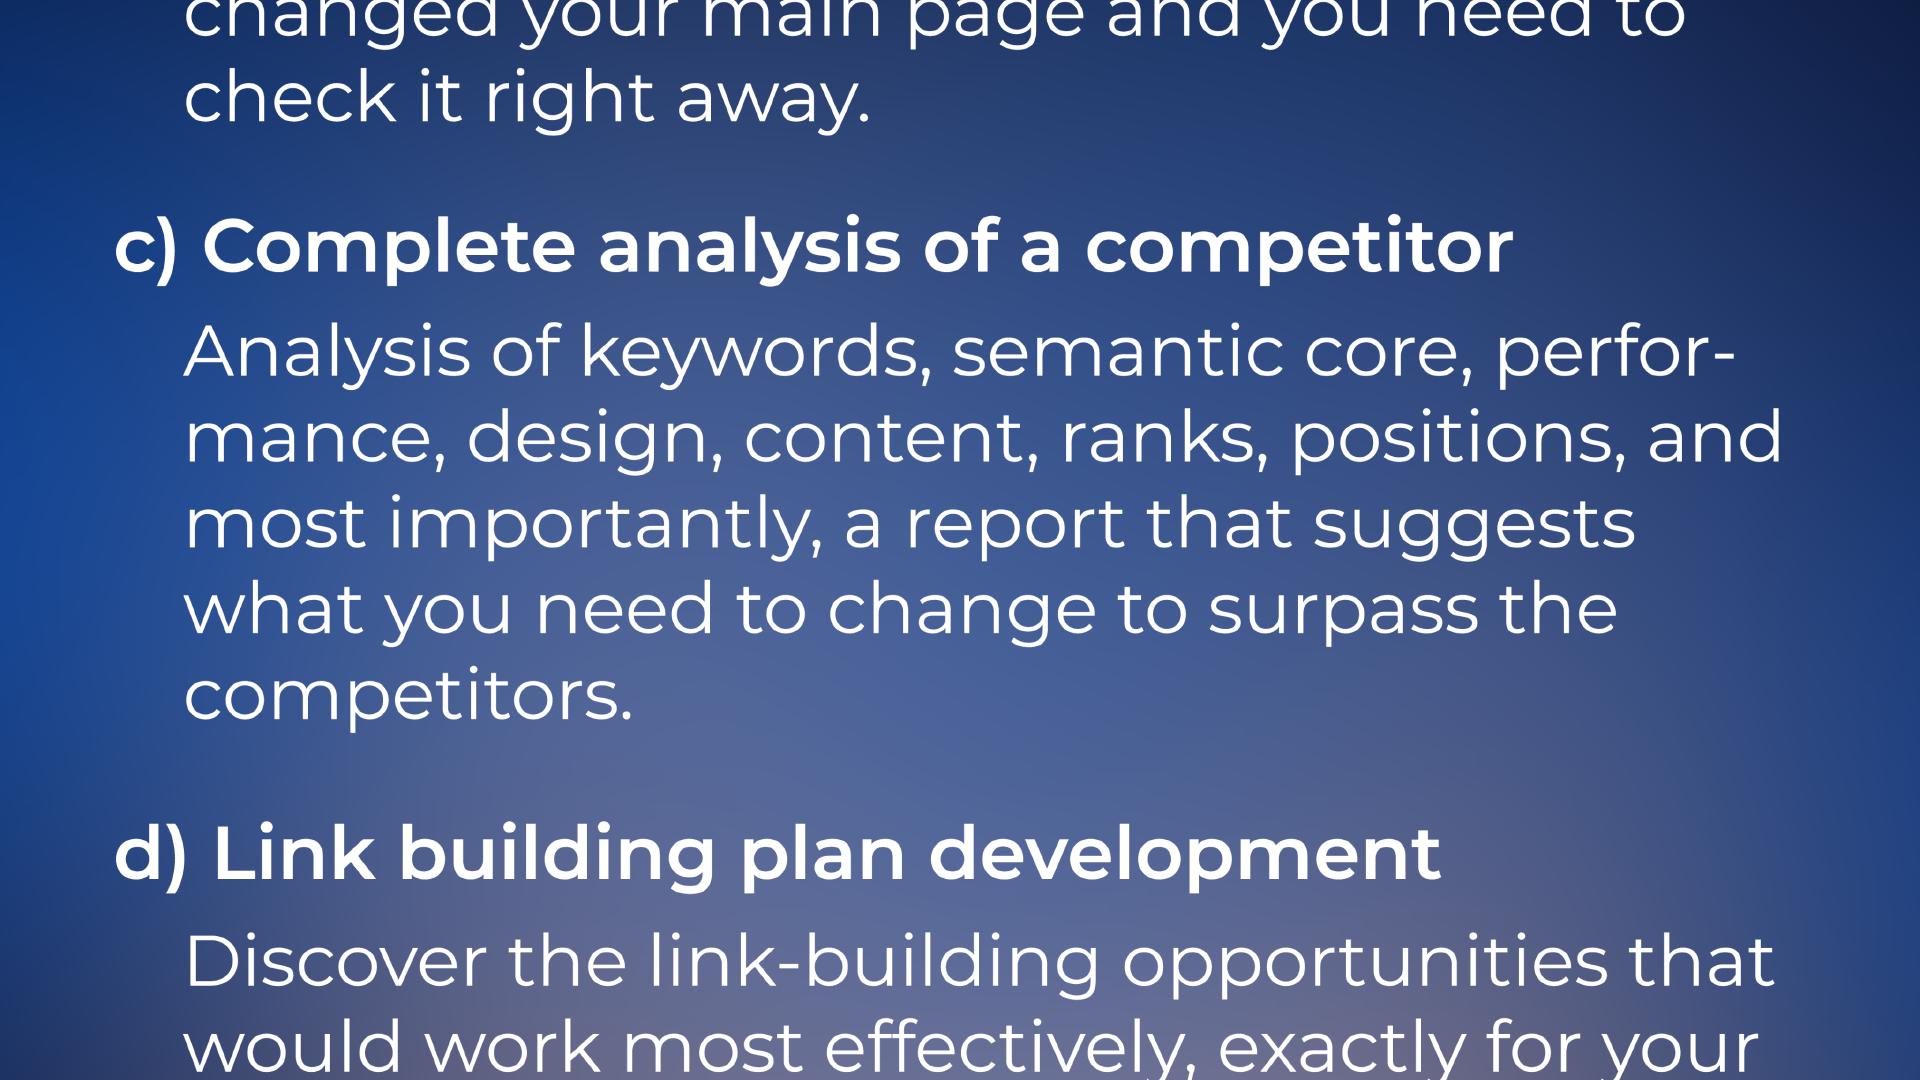 ... changed your main page and you need to check it right away. c) Complete analysis of a competitor: Analysis of keywords, semantic core, performance, design, content, ranks, positions, and most importantly, a report that suggests what you need to change to surpass the competitors. d) Link building plan development: Discover the link-building opportunities that would work most effectively, exactly for your business.